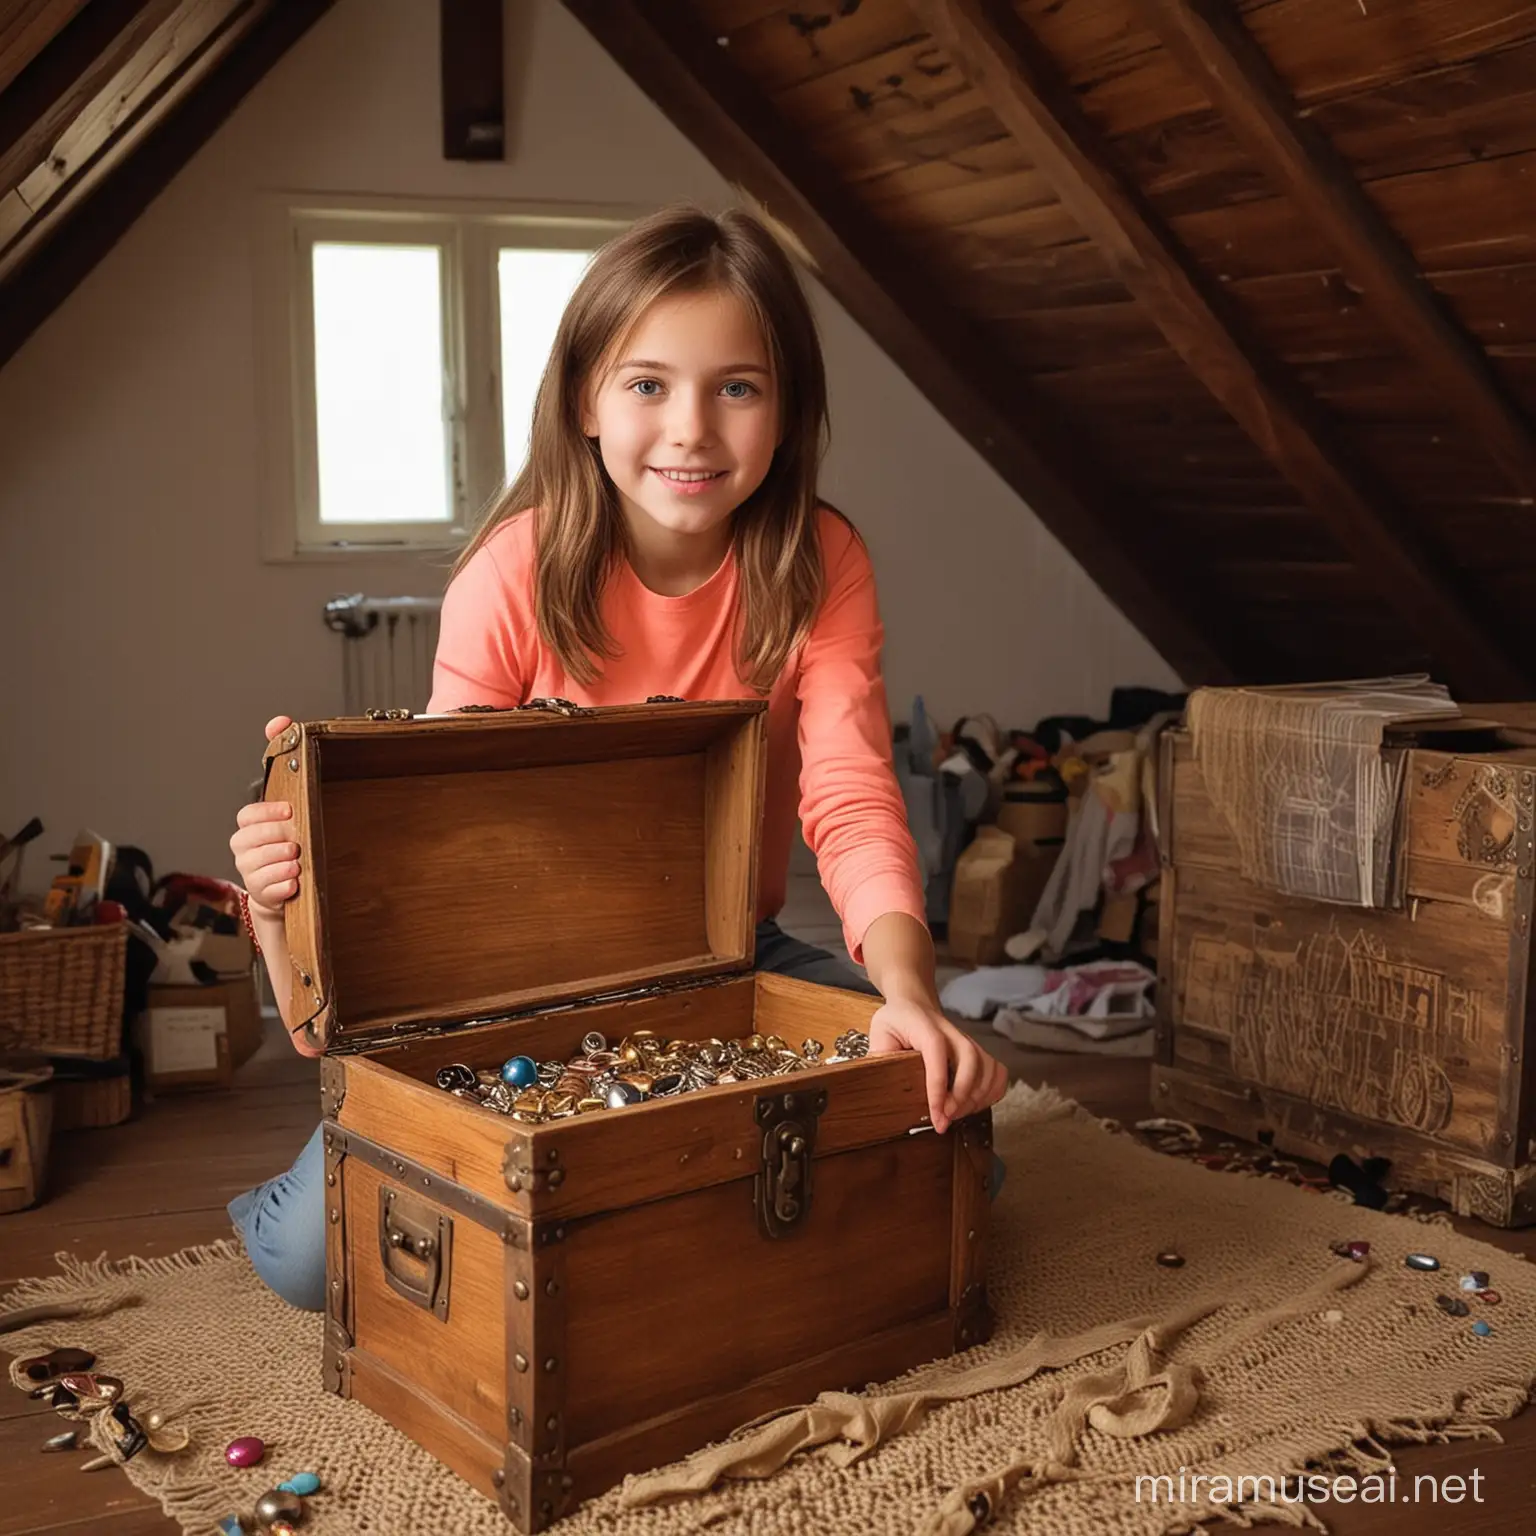 Young Girl Discovers Hidden Treasure Chest in Attic